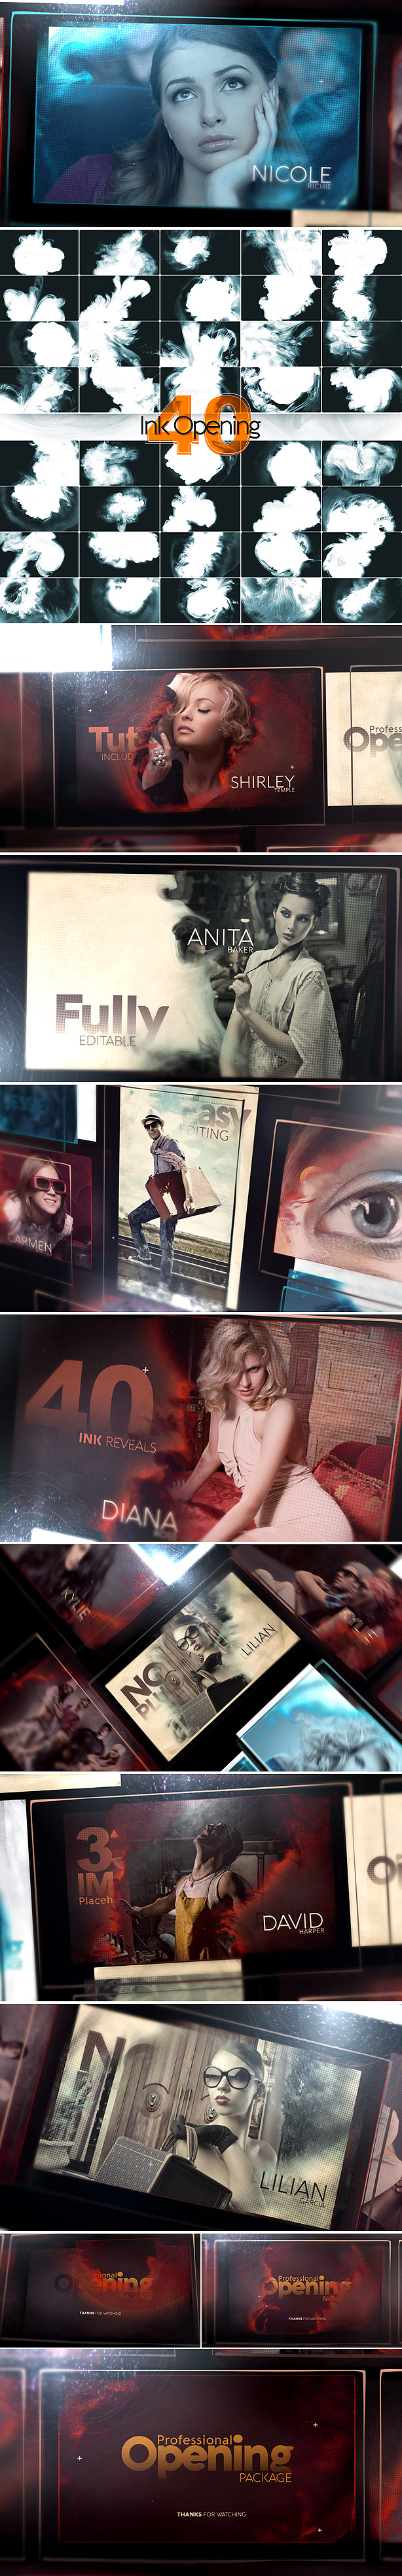 Videohive - Professional Opening Package 19318892 - Free Download 